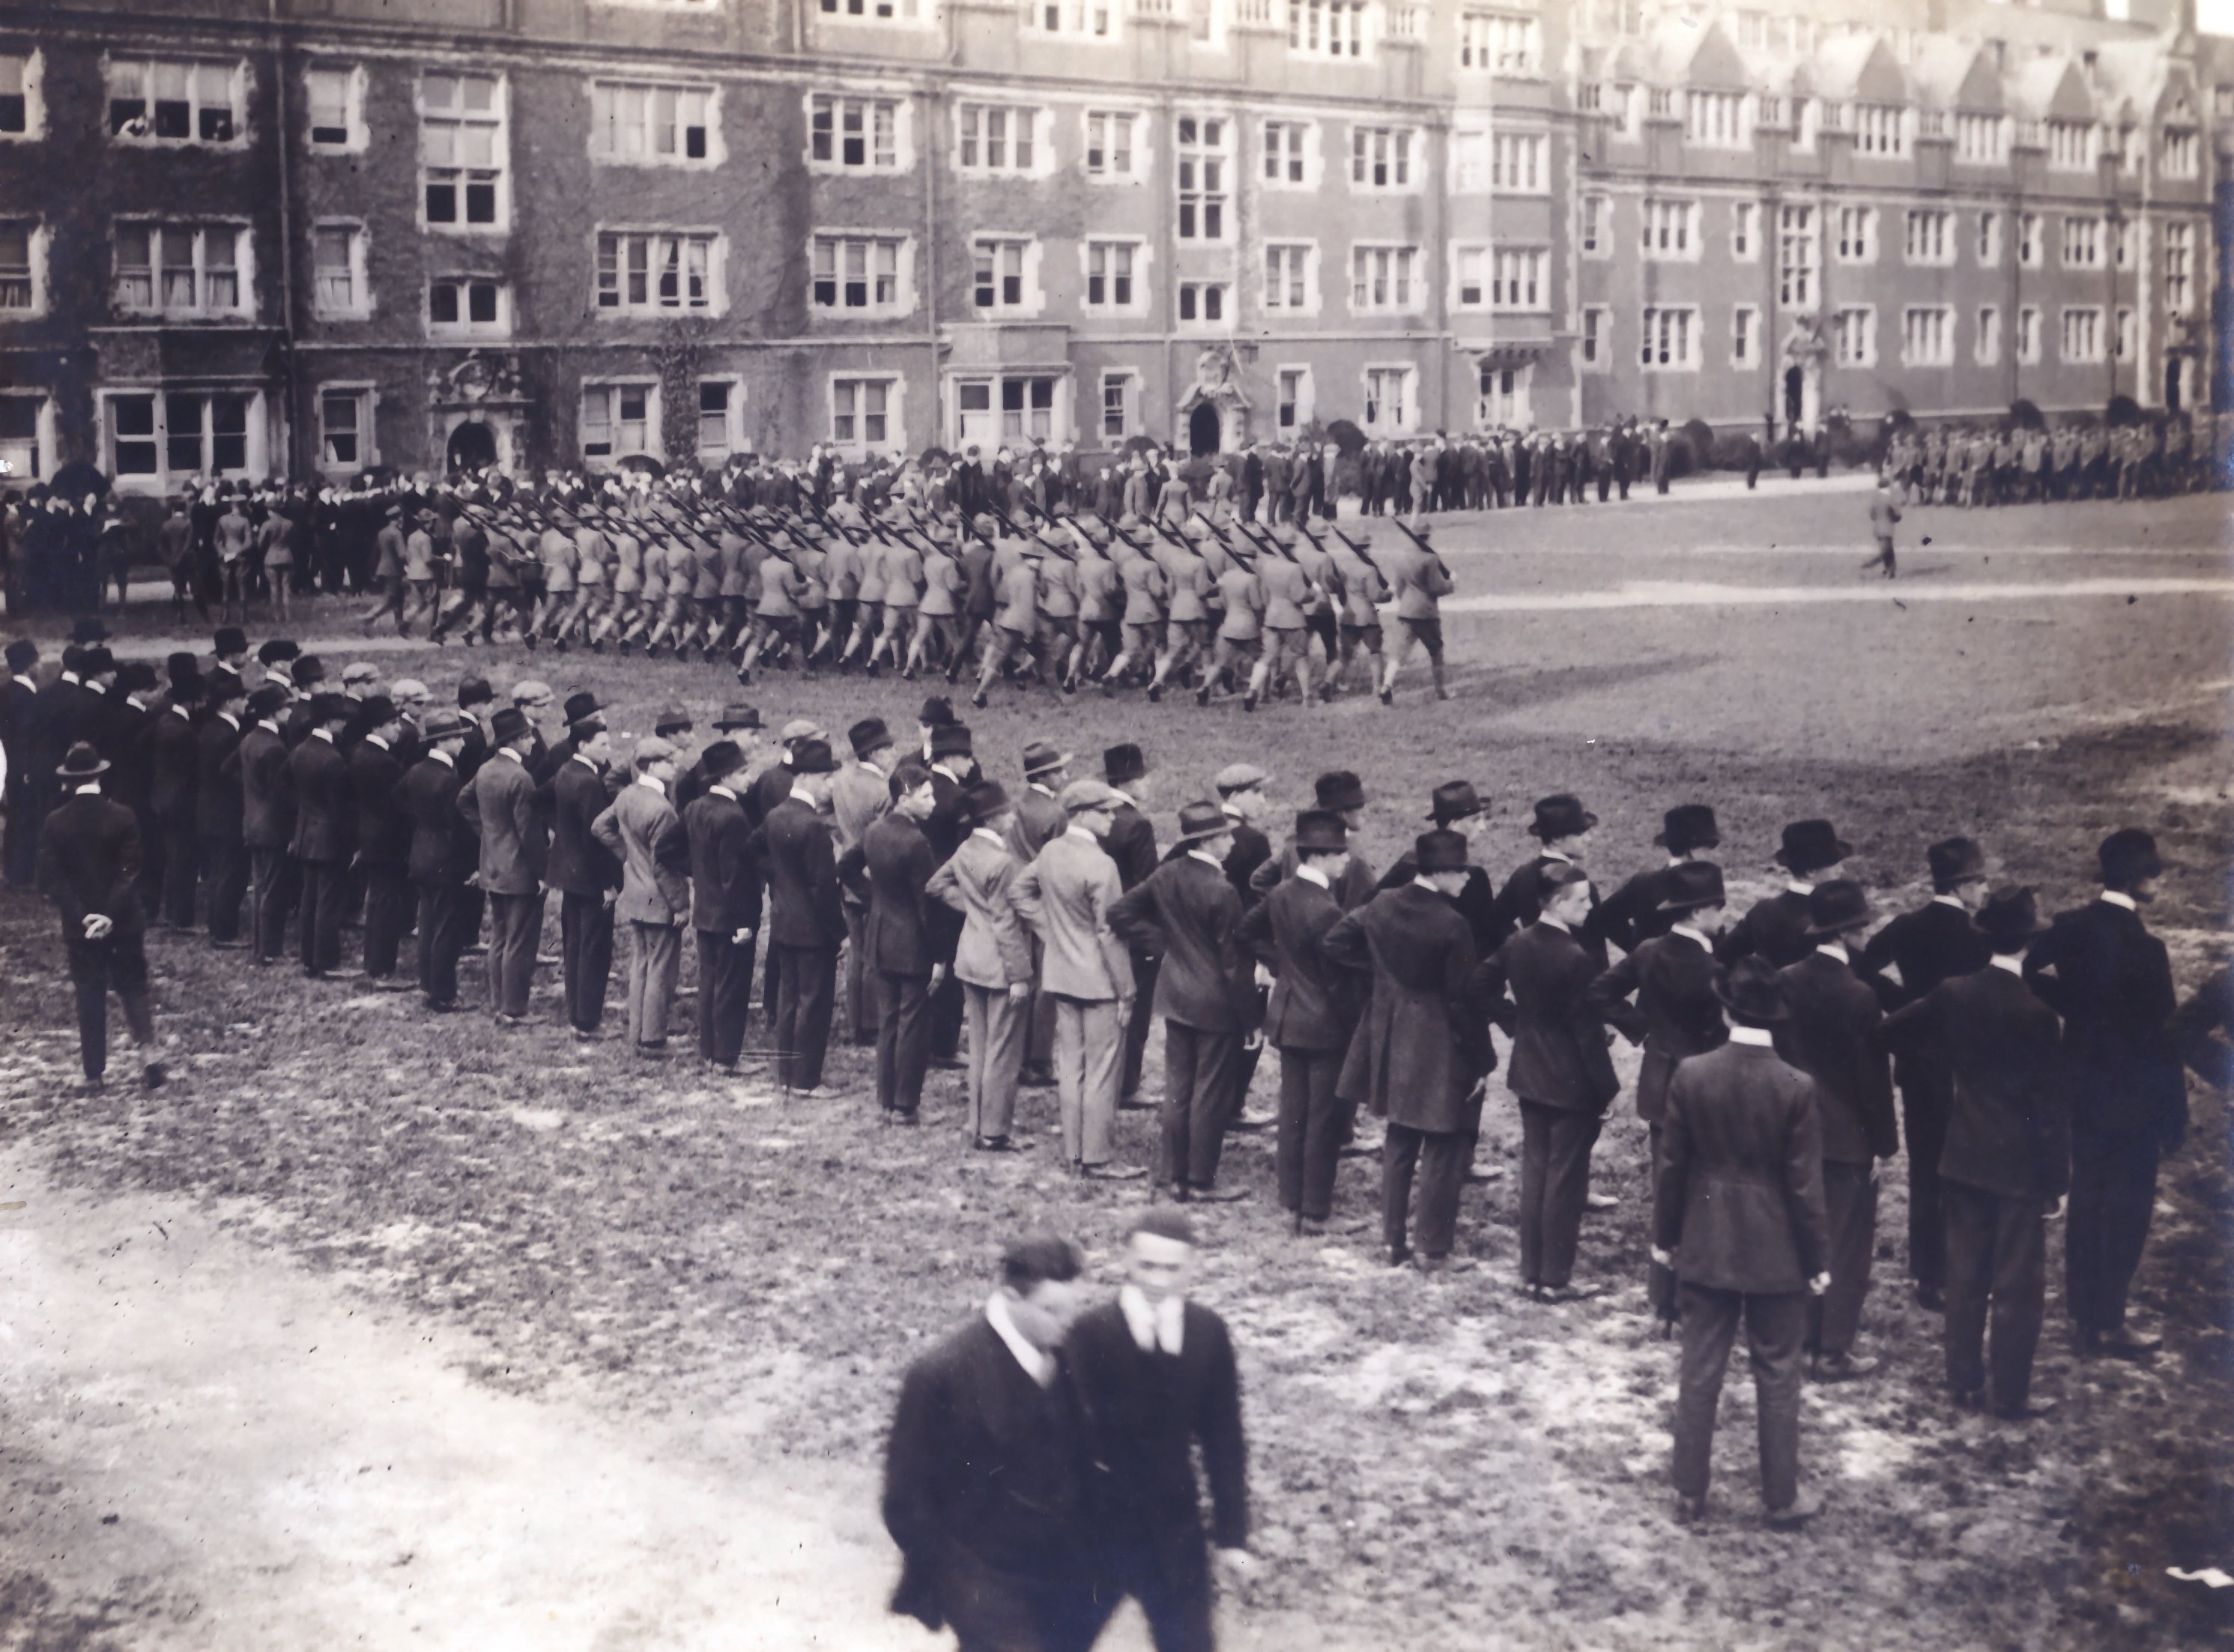 Black and white photo of military personnel on campus